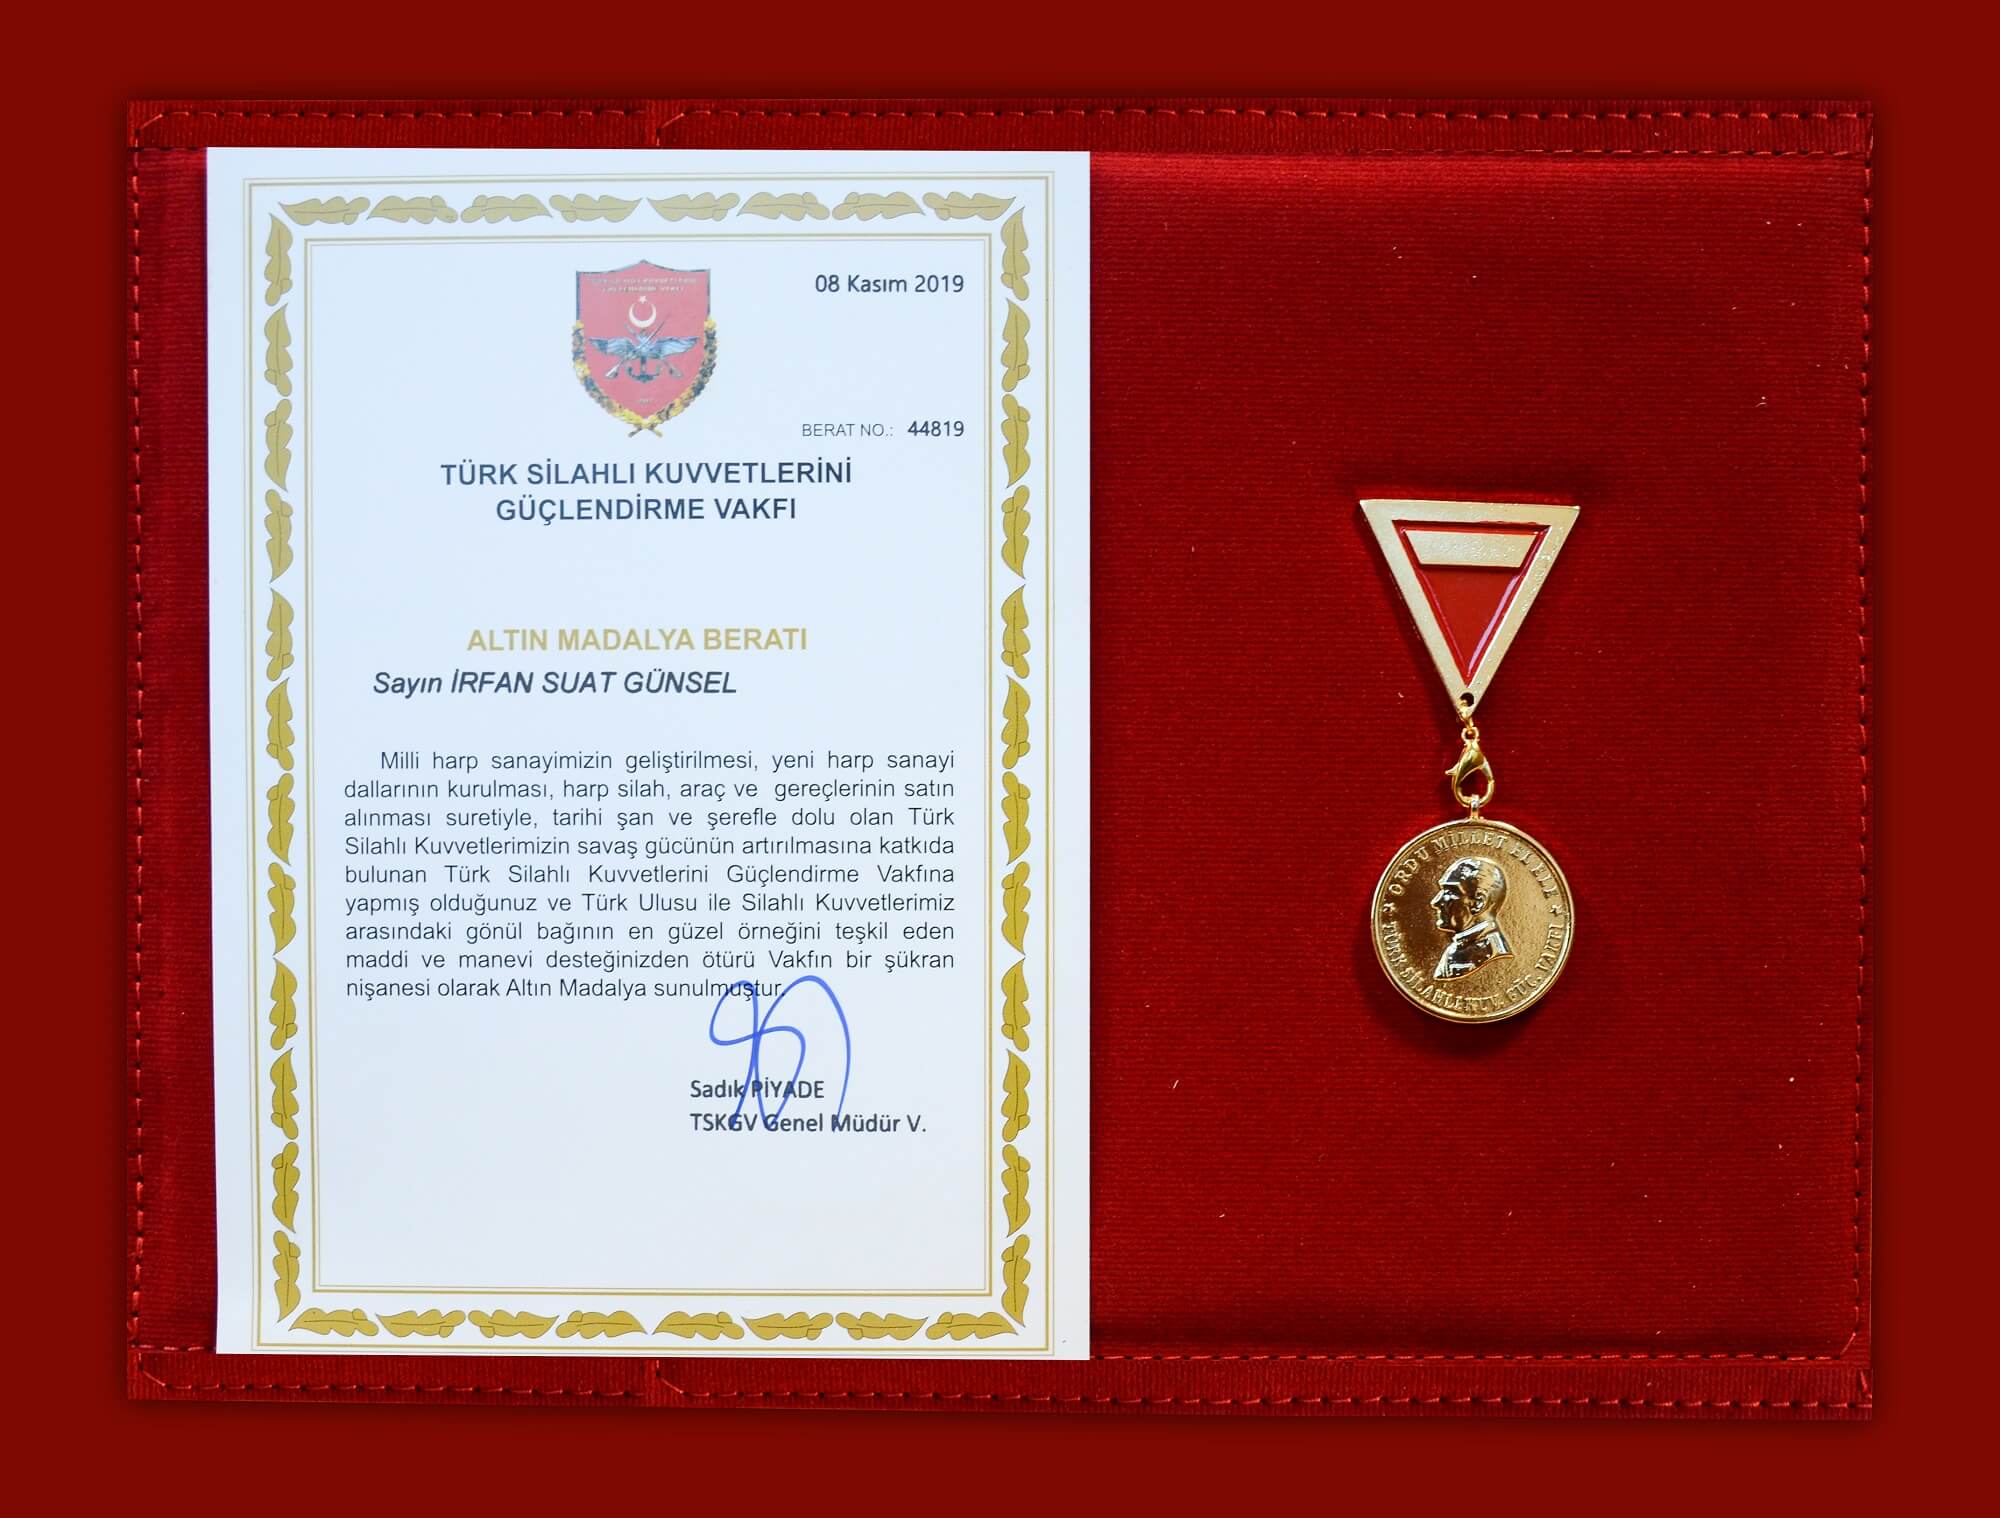 A Gold Medal was awarded to the Chairman of the Board of Trustees of Near East University Prof. Dr. İrfan Suat Günsel by the Turkish Armed Forces Foundation